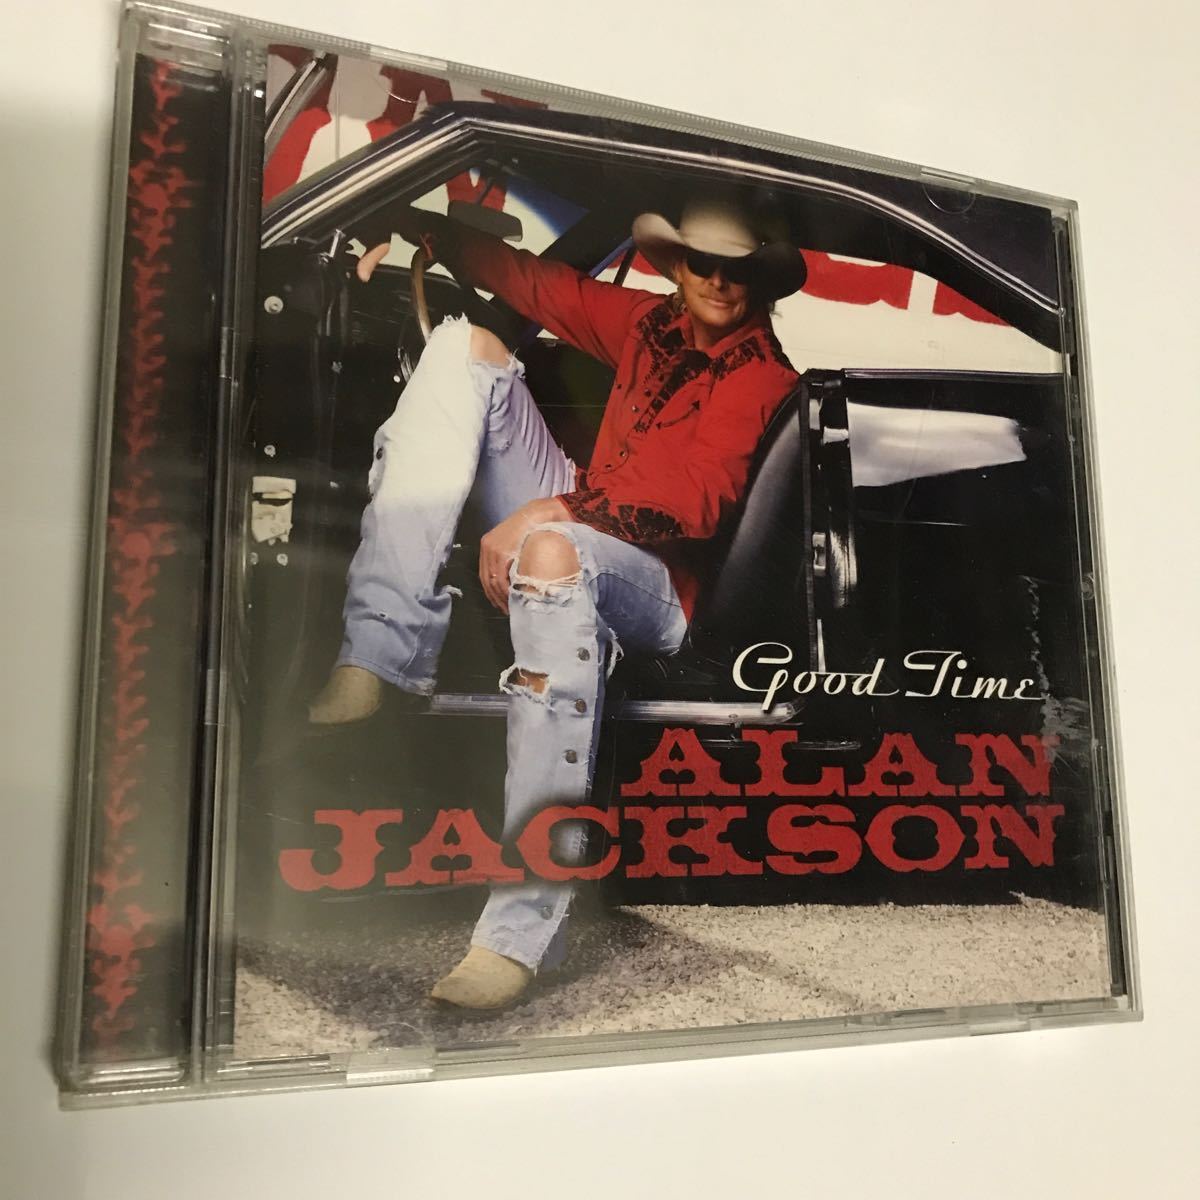 ALAN JACKSON CD 3枚組 WHO I AM The Gratest Hits Cokkection Good Time_画像4